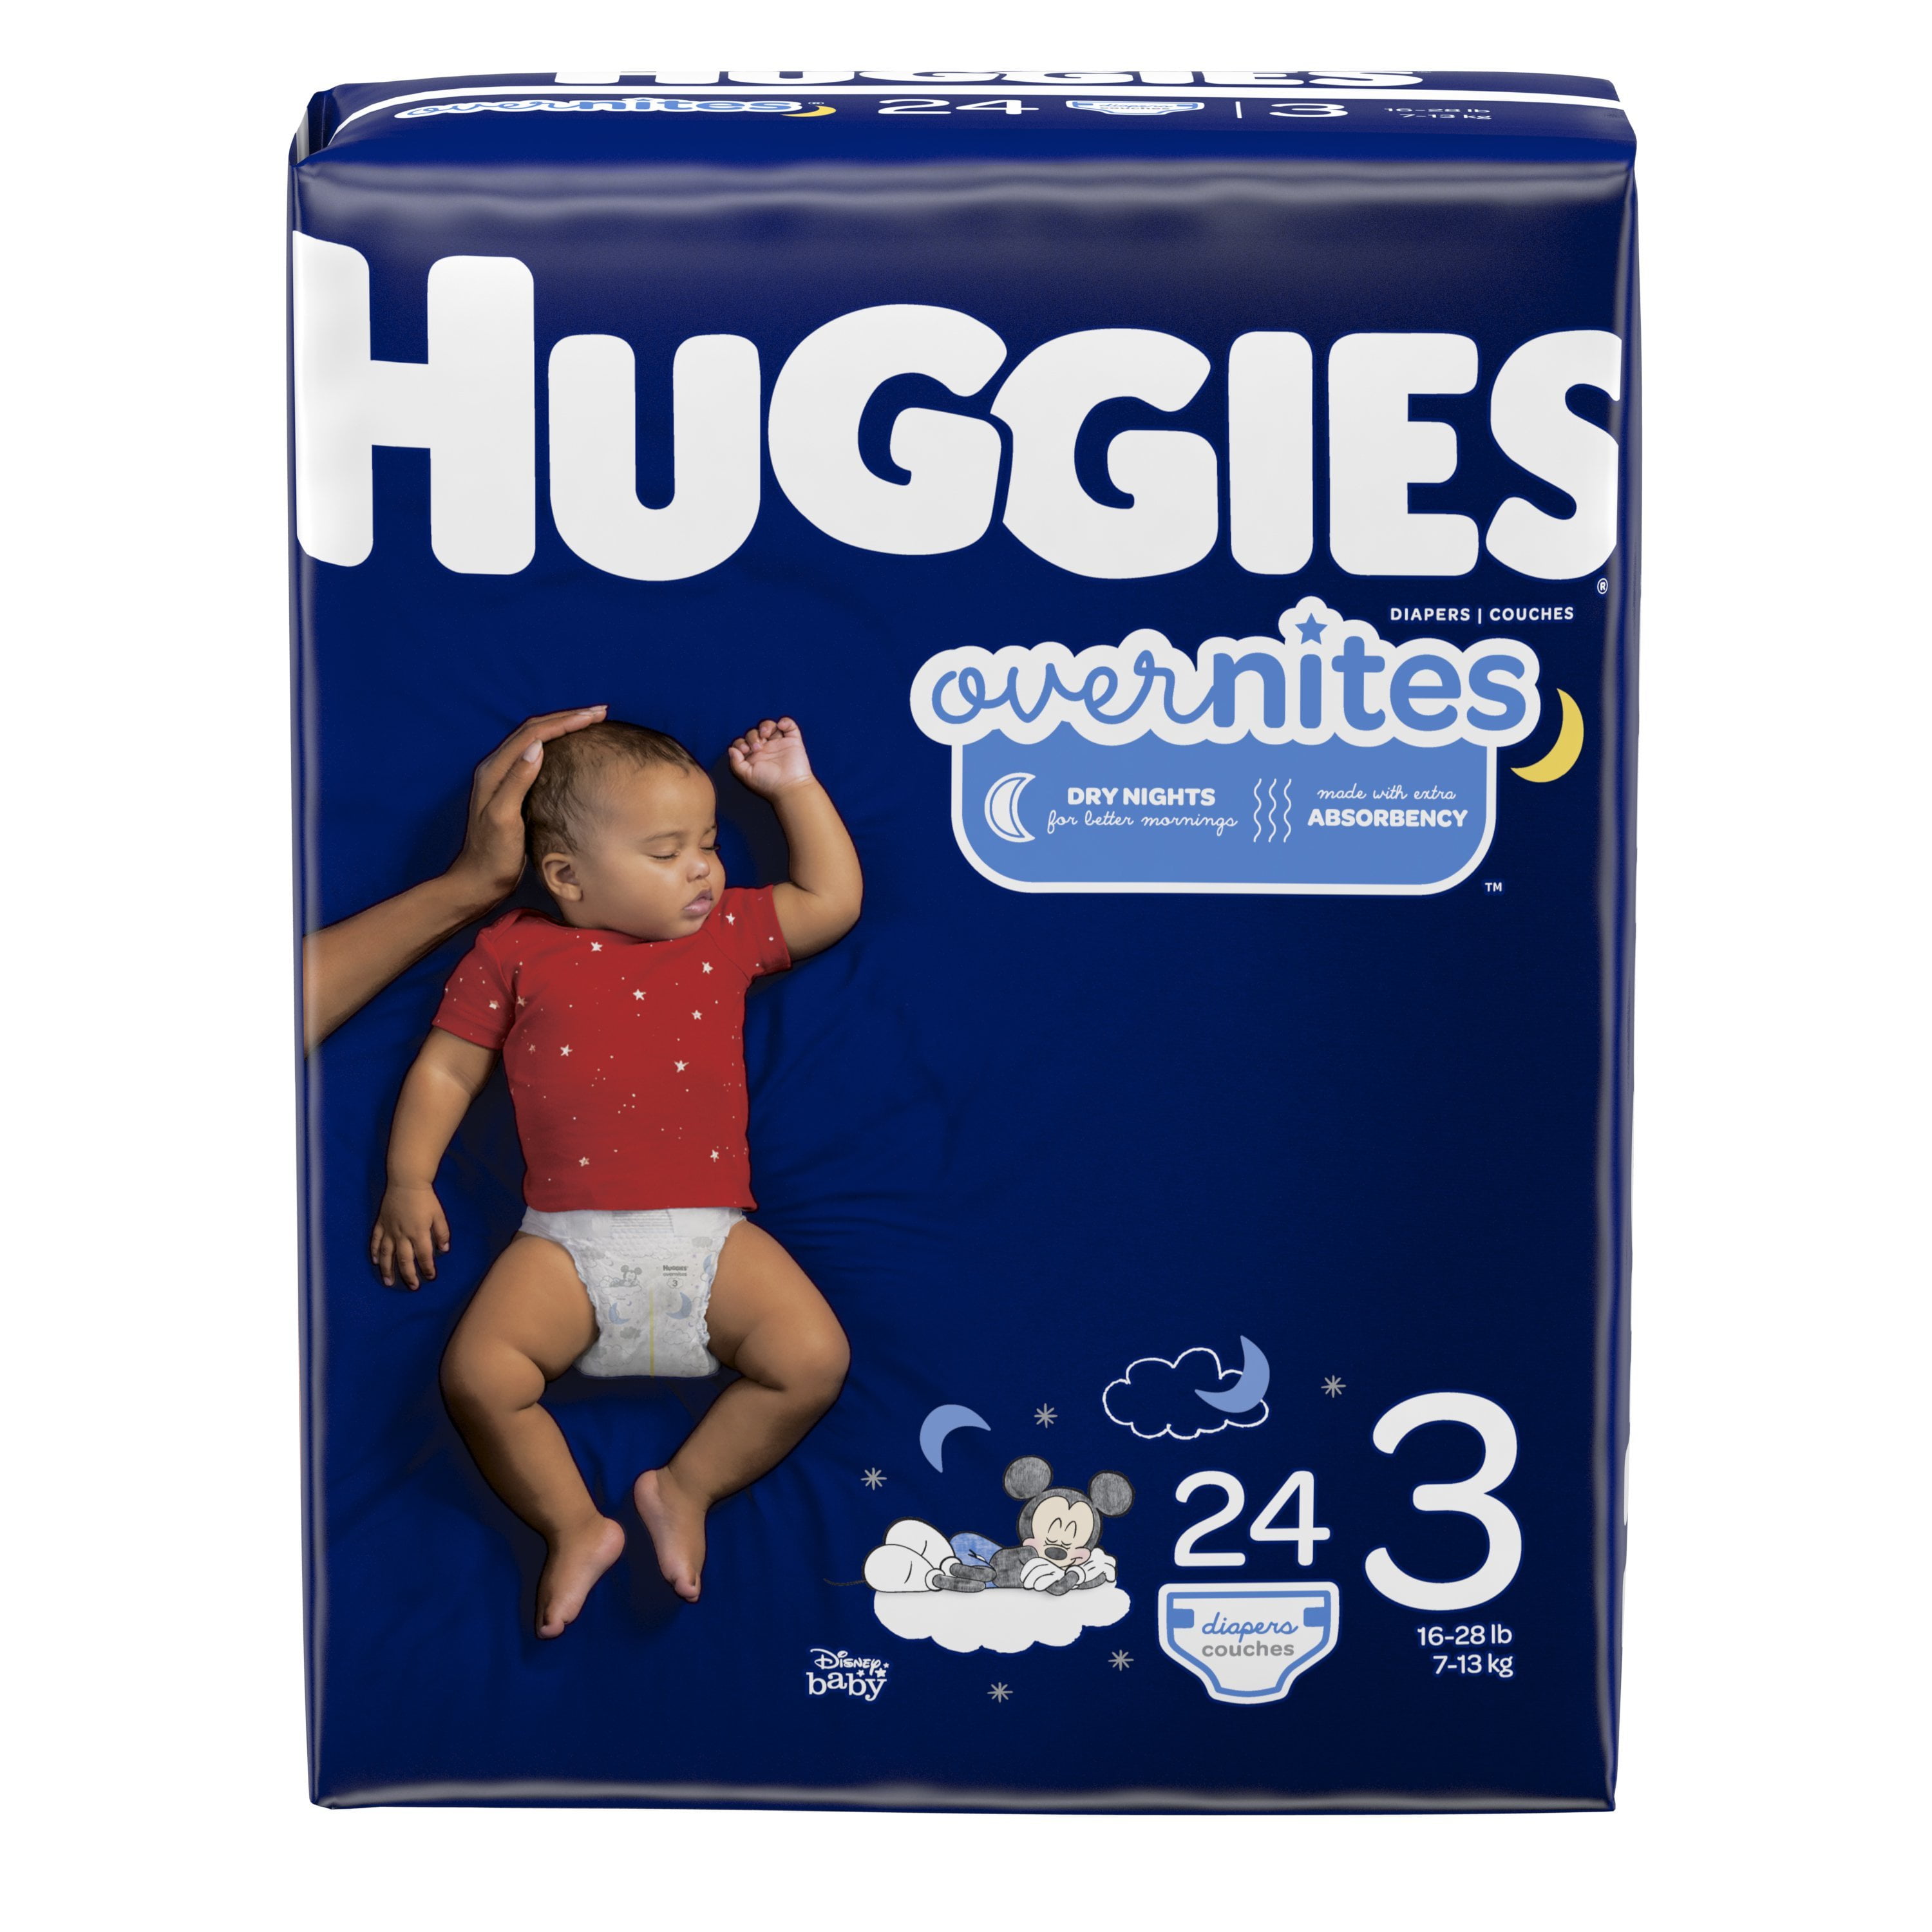 Huggies Overnites Nighttime Disposable Baby Diapers, Size 3, 4, 5, 6 ✓